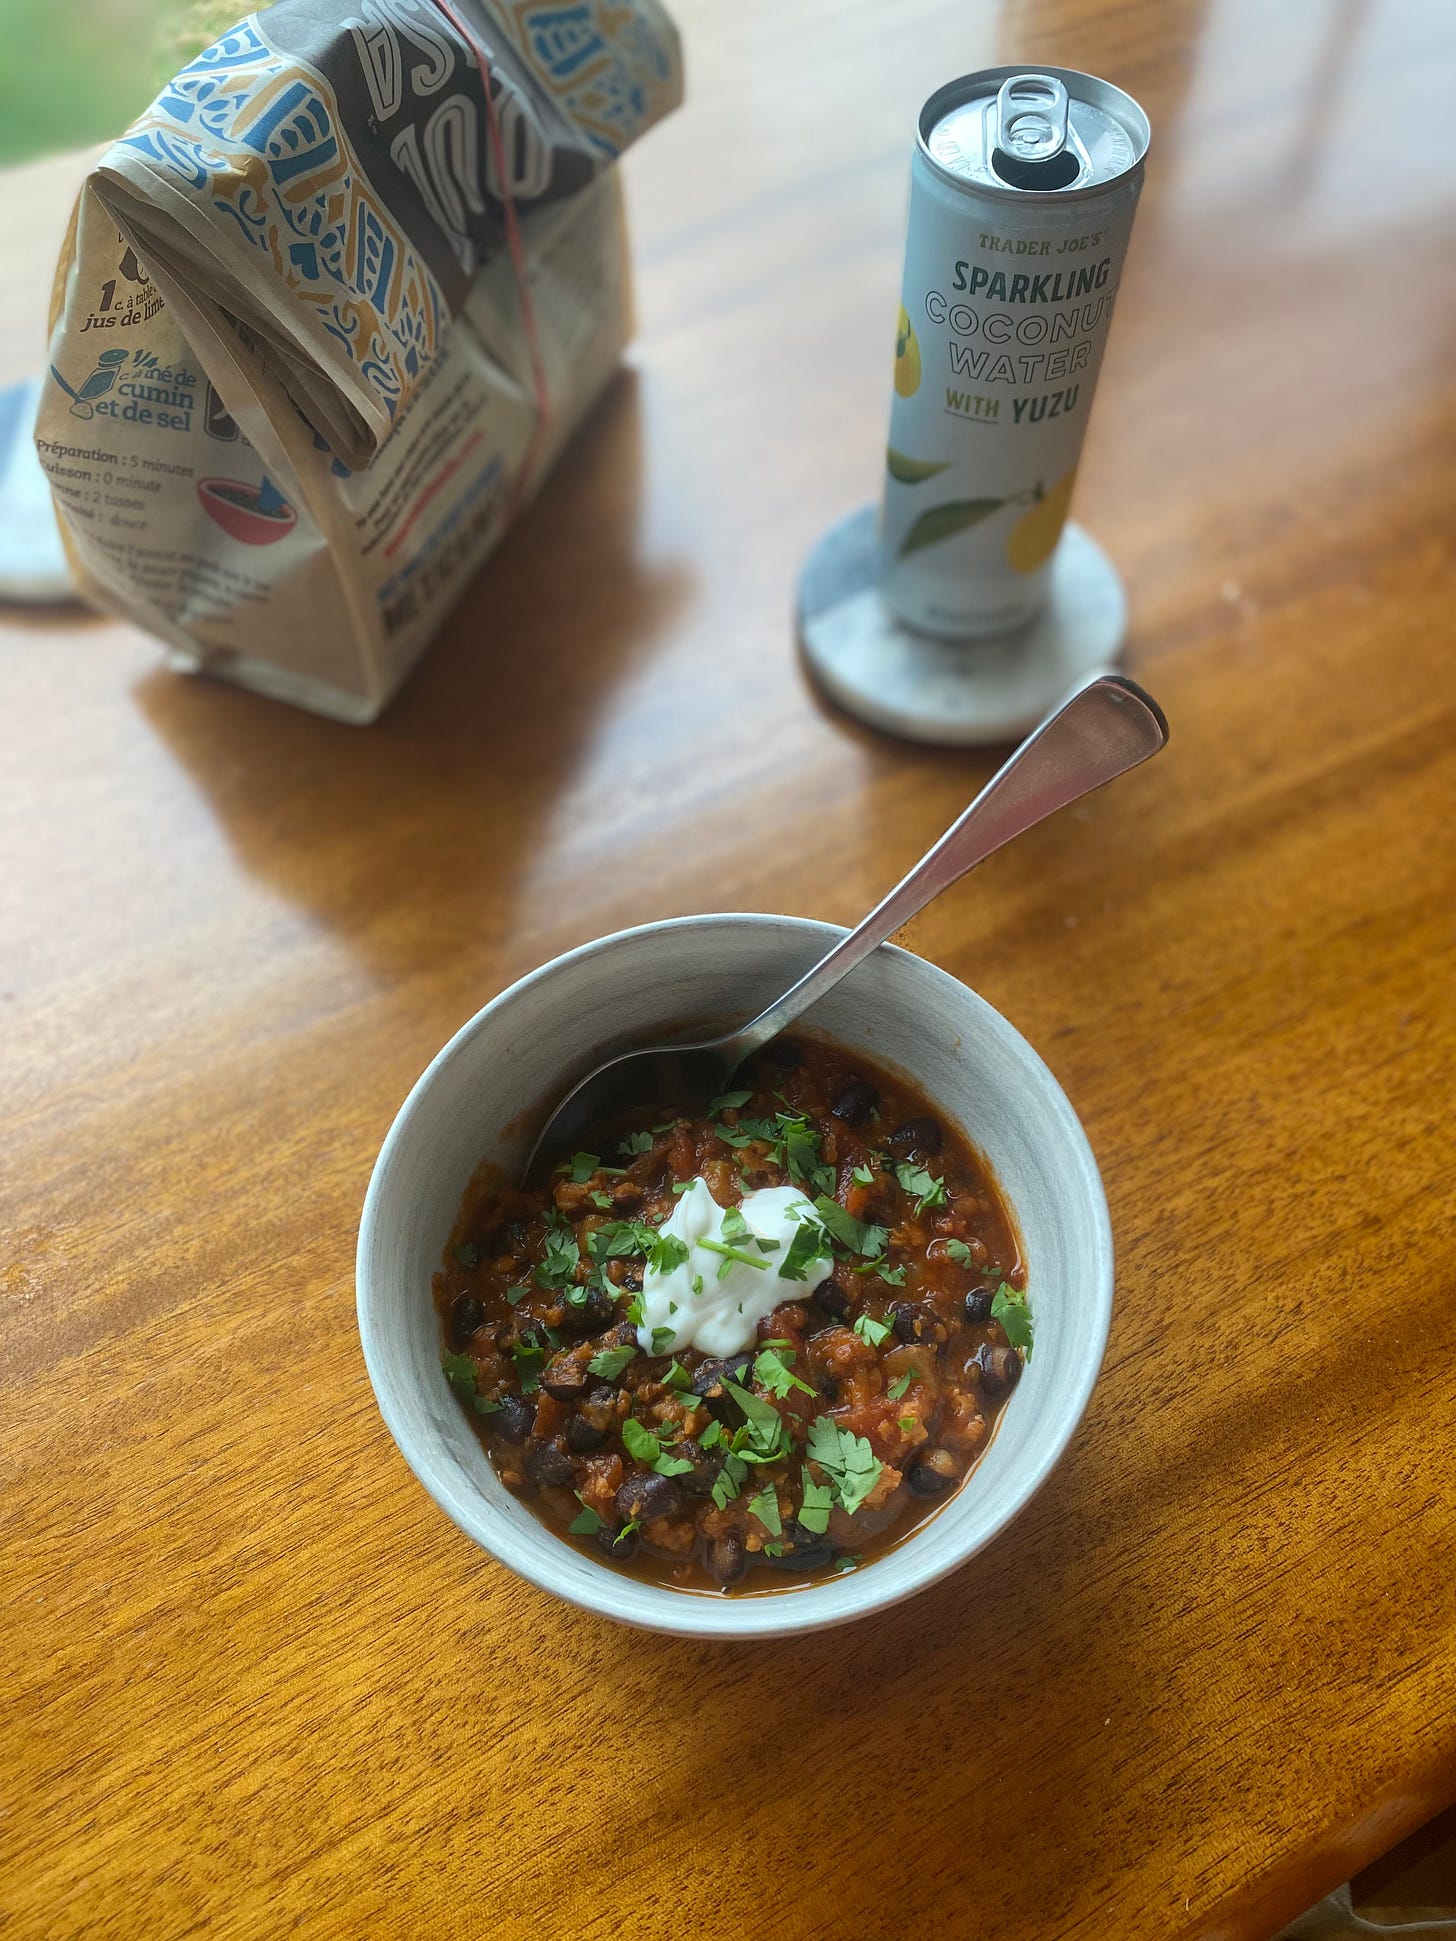 a bowl of the chili described above, topped with cilantro and sour cream. In the background is a bag of tortilla chips with a rubber band around it, and a can of sparkling coconut water on a coaster.